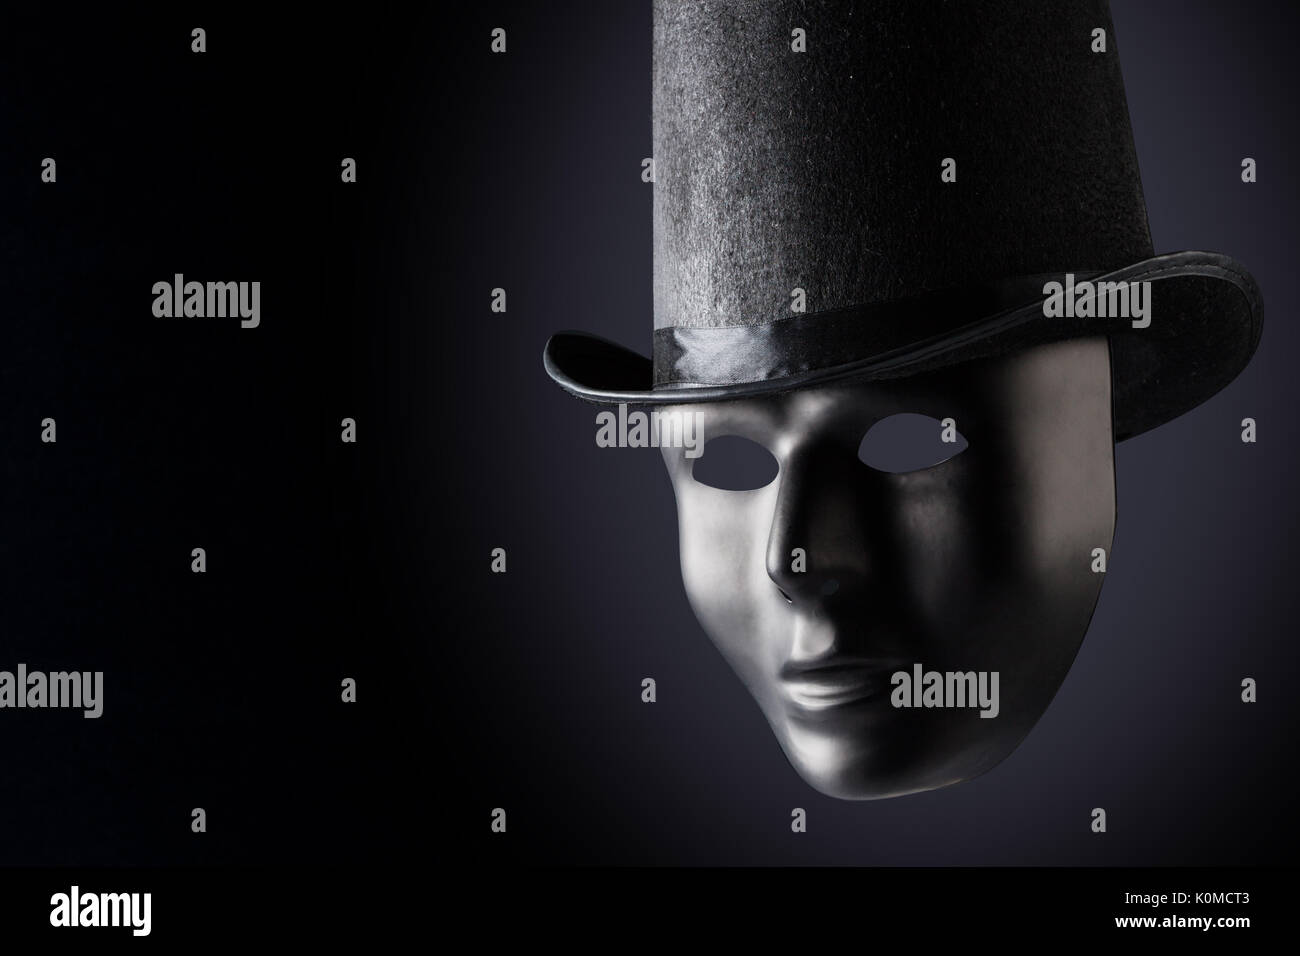 Black mask face closeup wearing black top hat on black background with copy space. Social masking and mystery concept Stock Photo